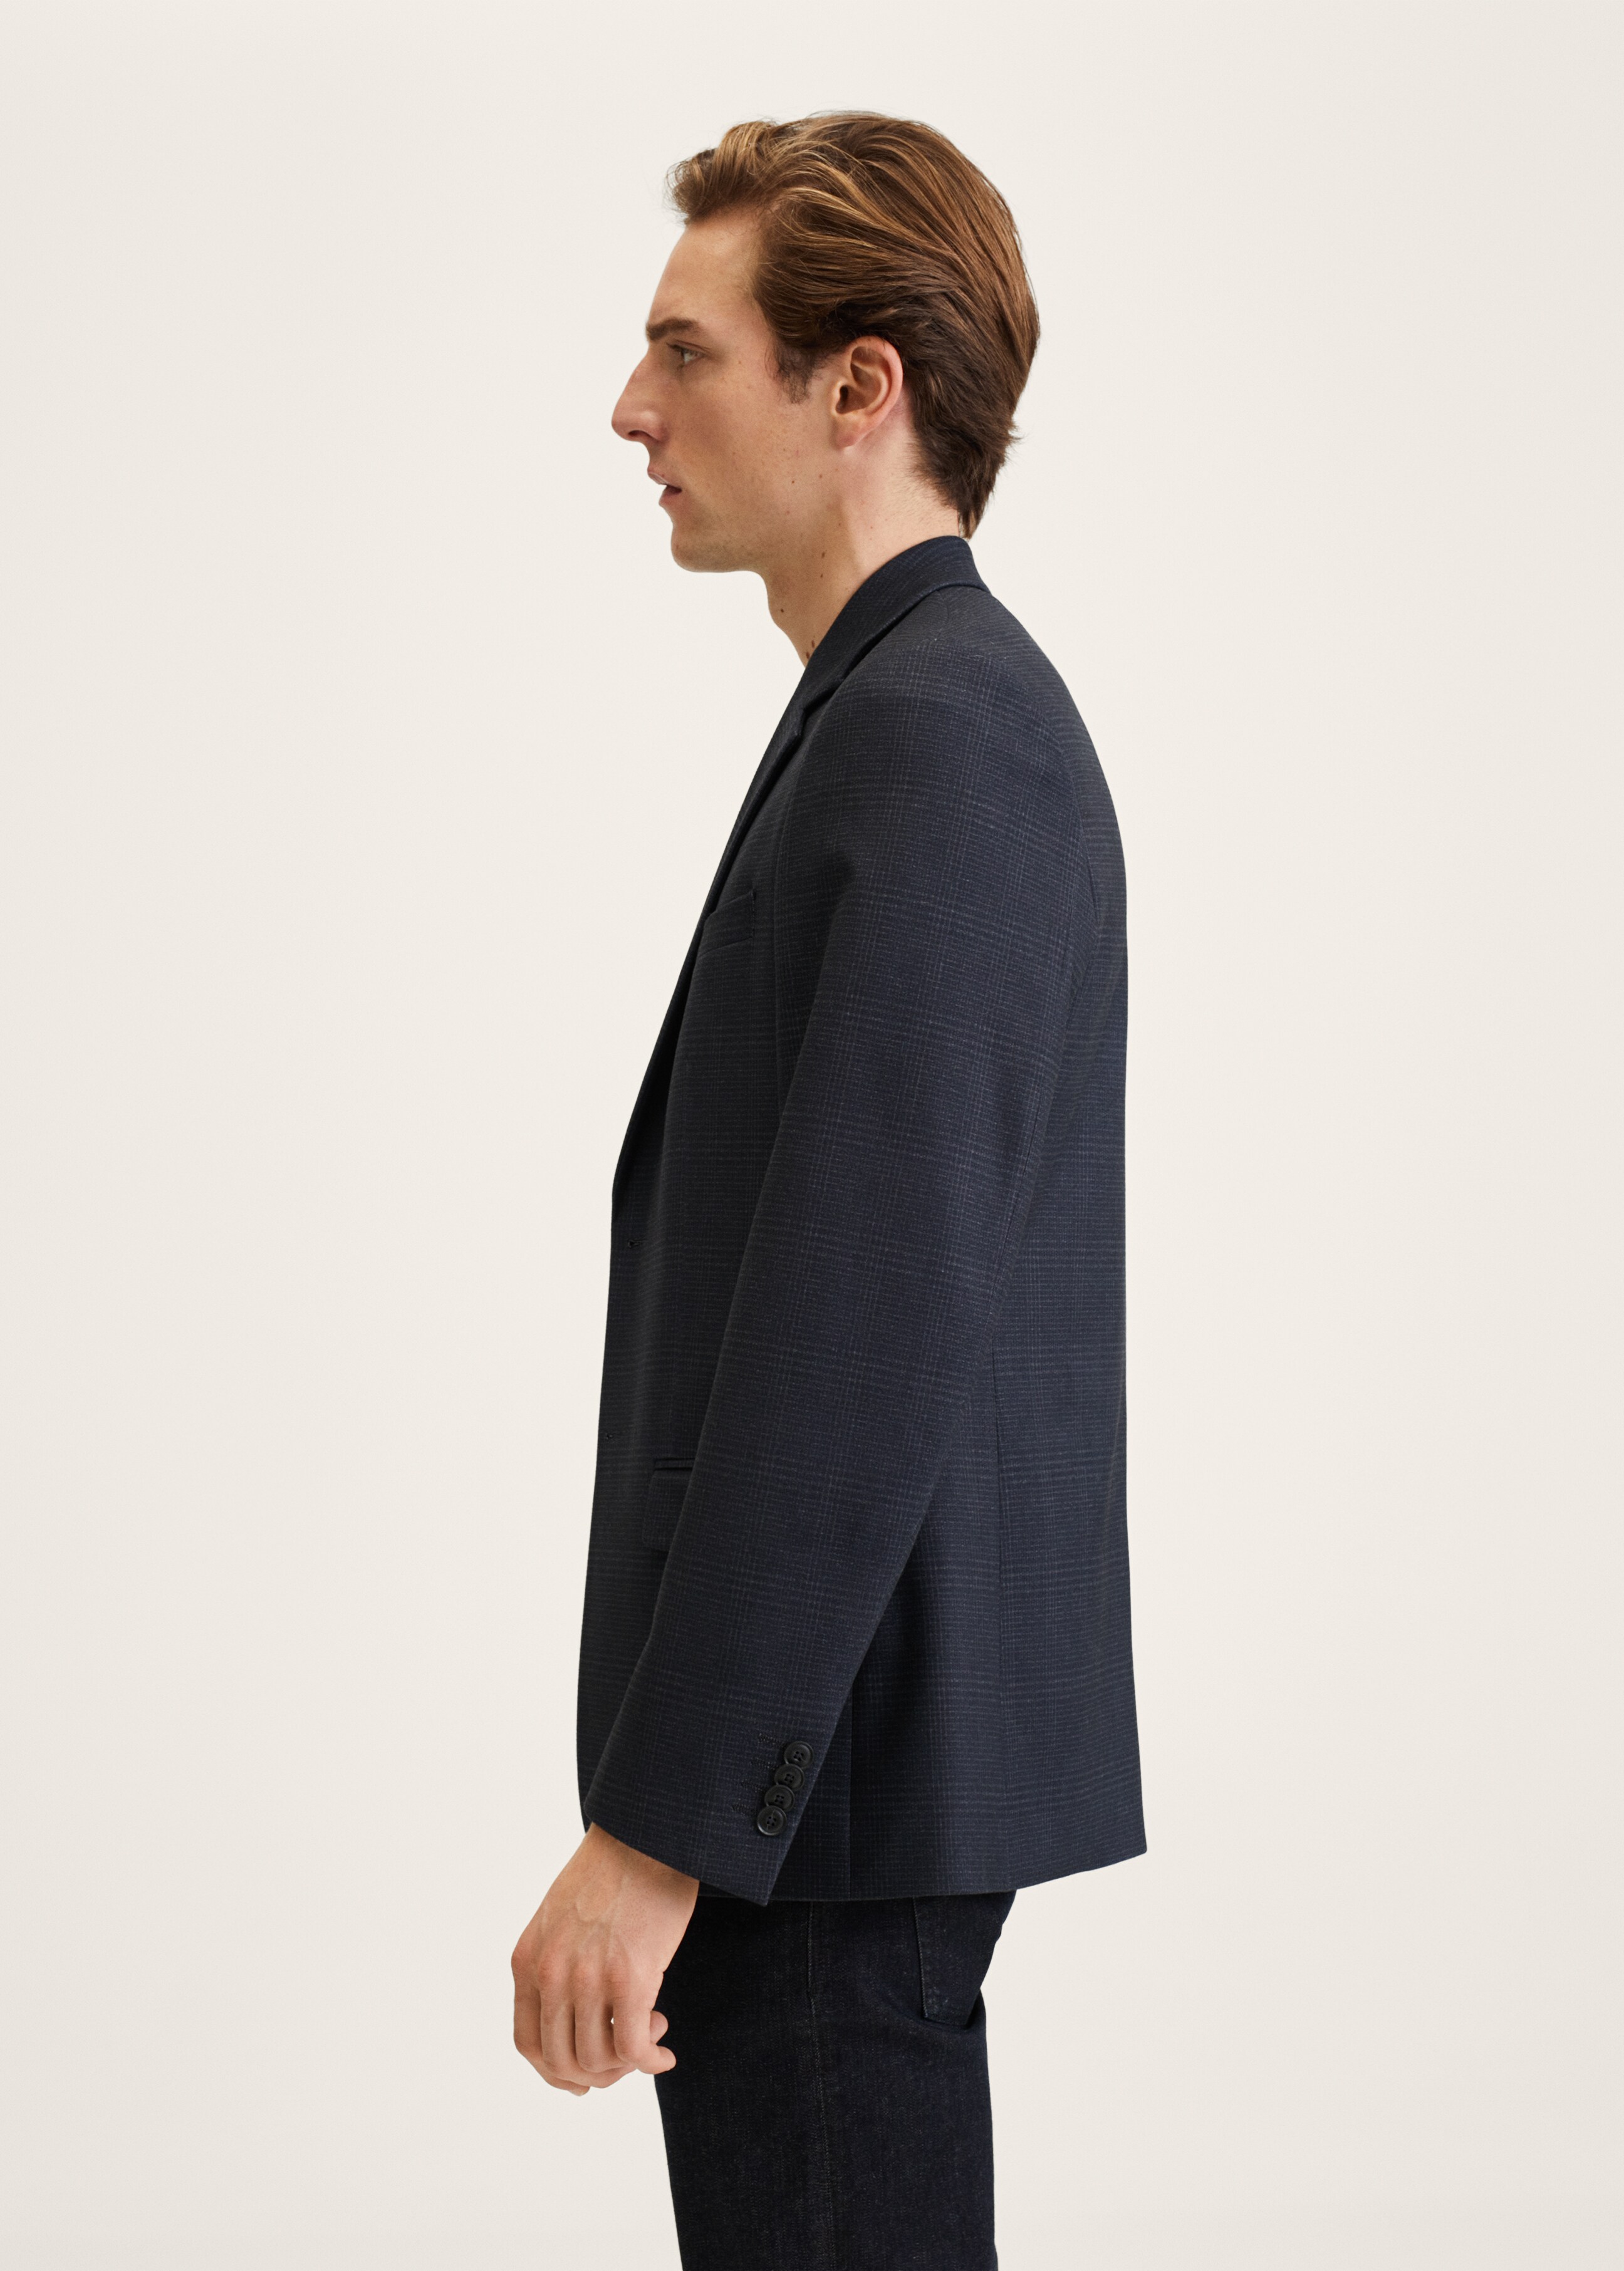 Prince of Wales blazer - Details of the article 2